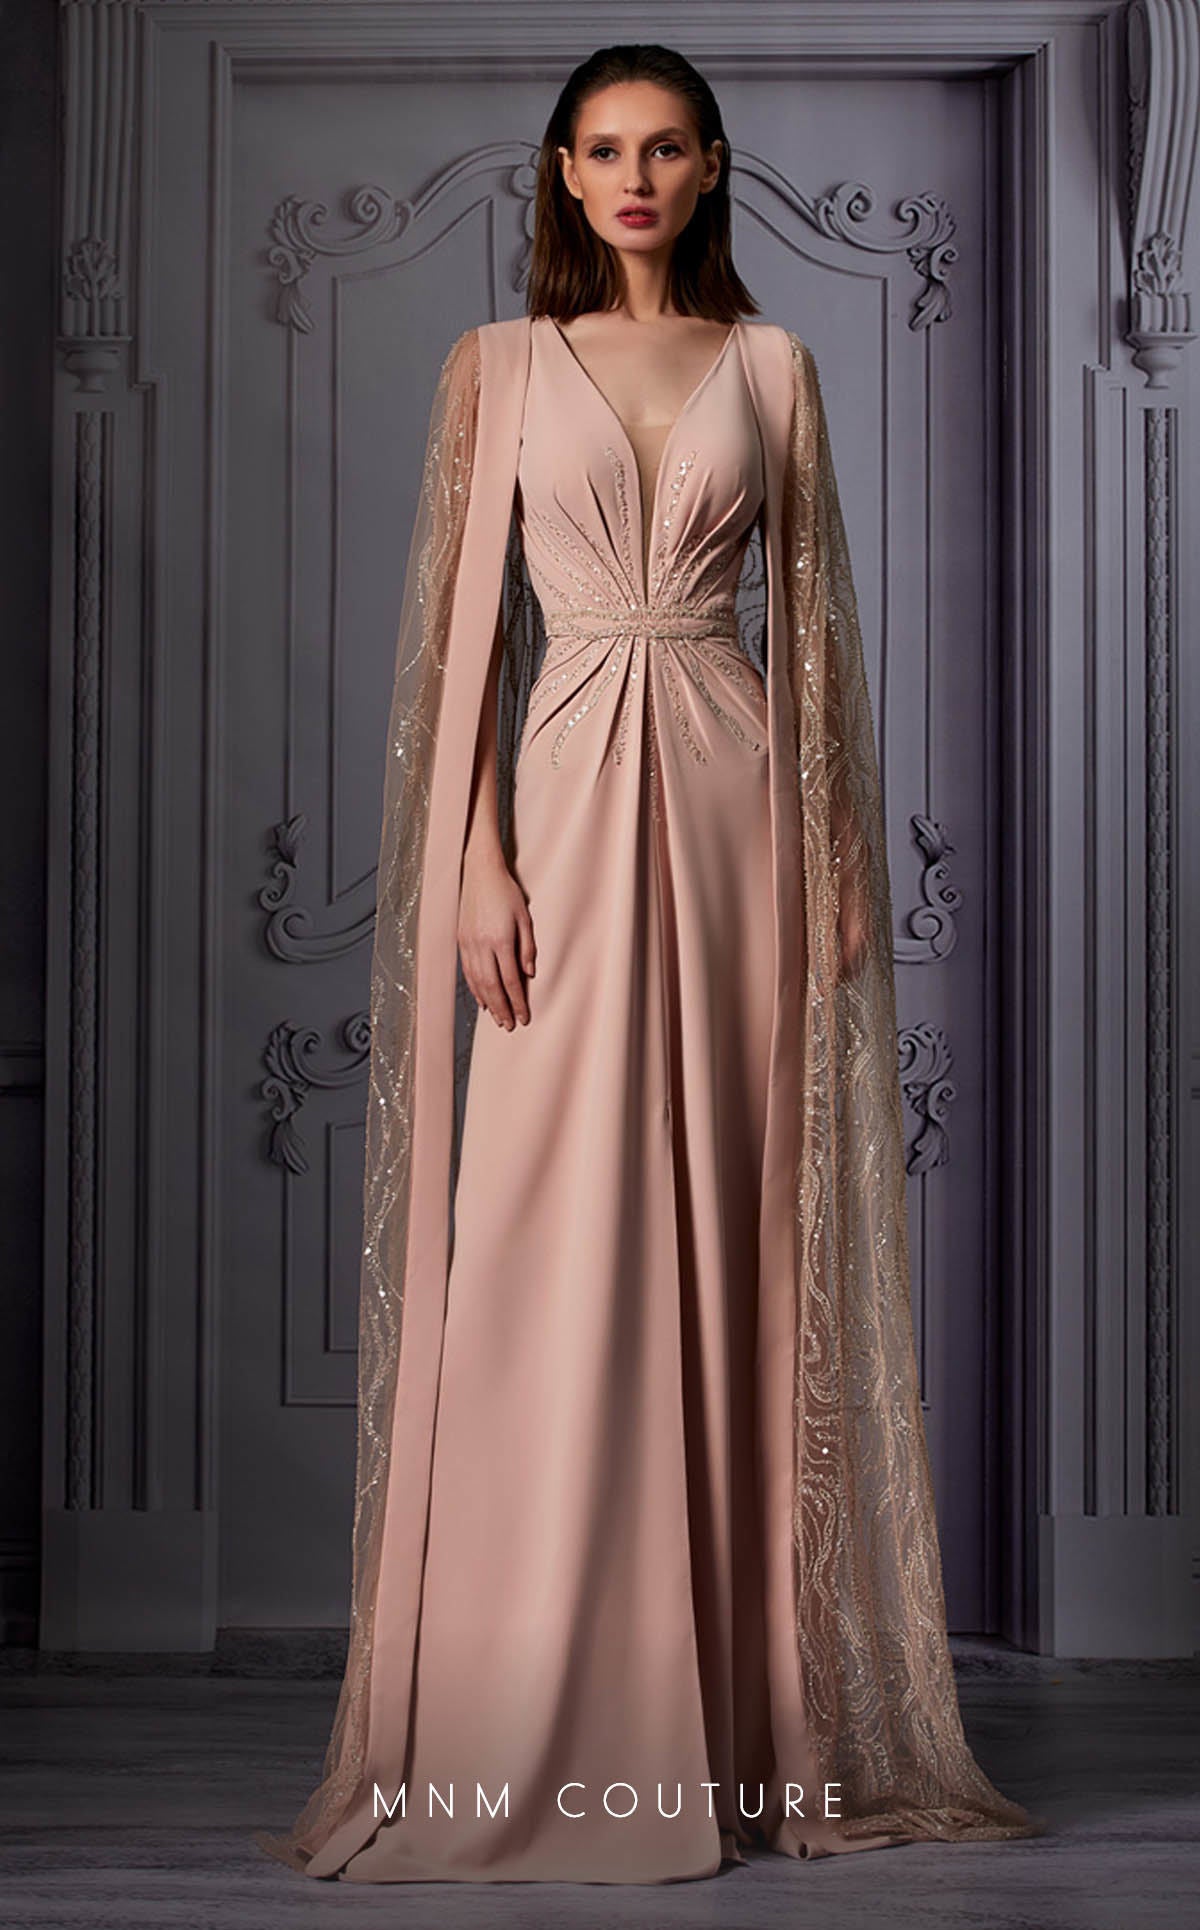 MNM-Couture-K3853-Crepe-Crew-Neck-Long-Sleeves-Fitted-Dress-Pink-Dazzling-Elegance-Style-Front-View - Rofial Beauty